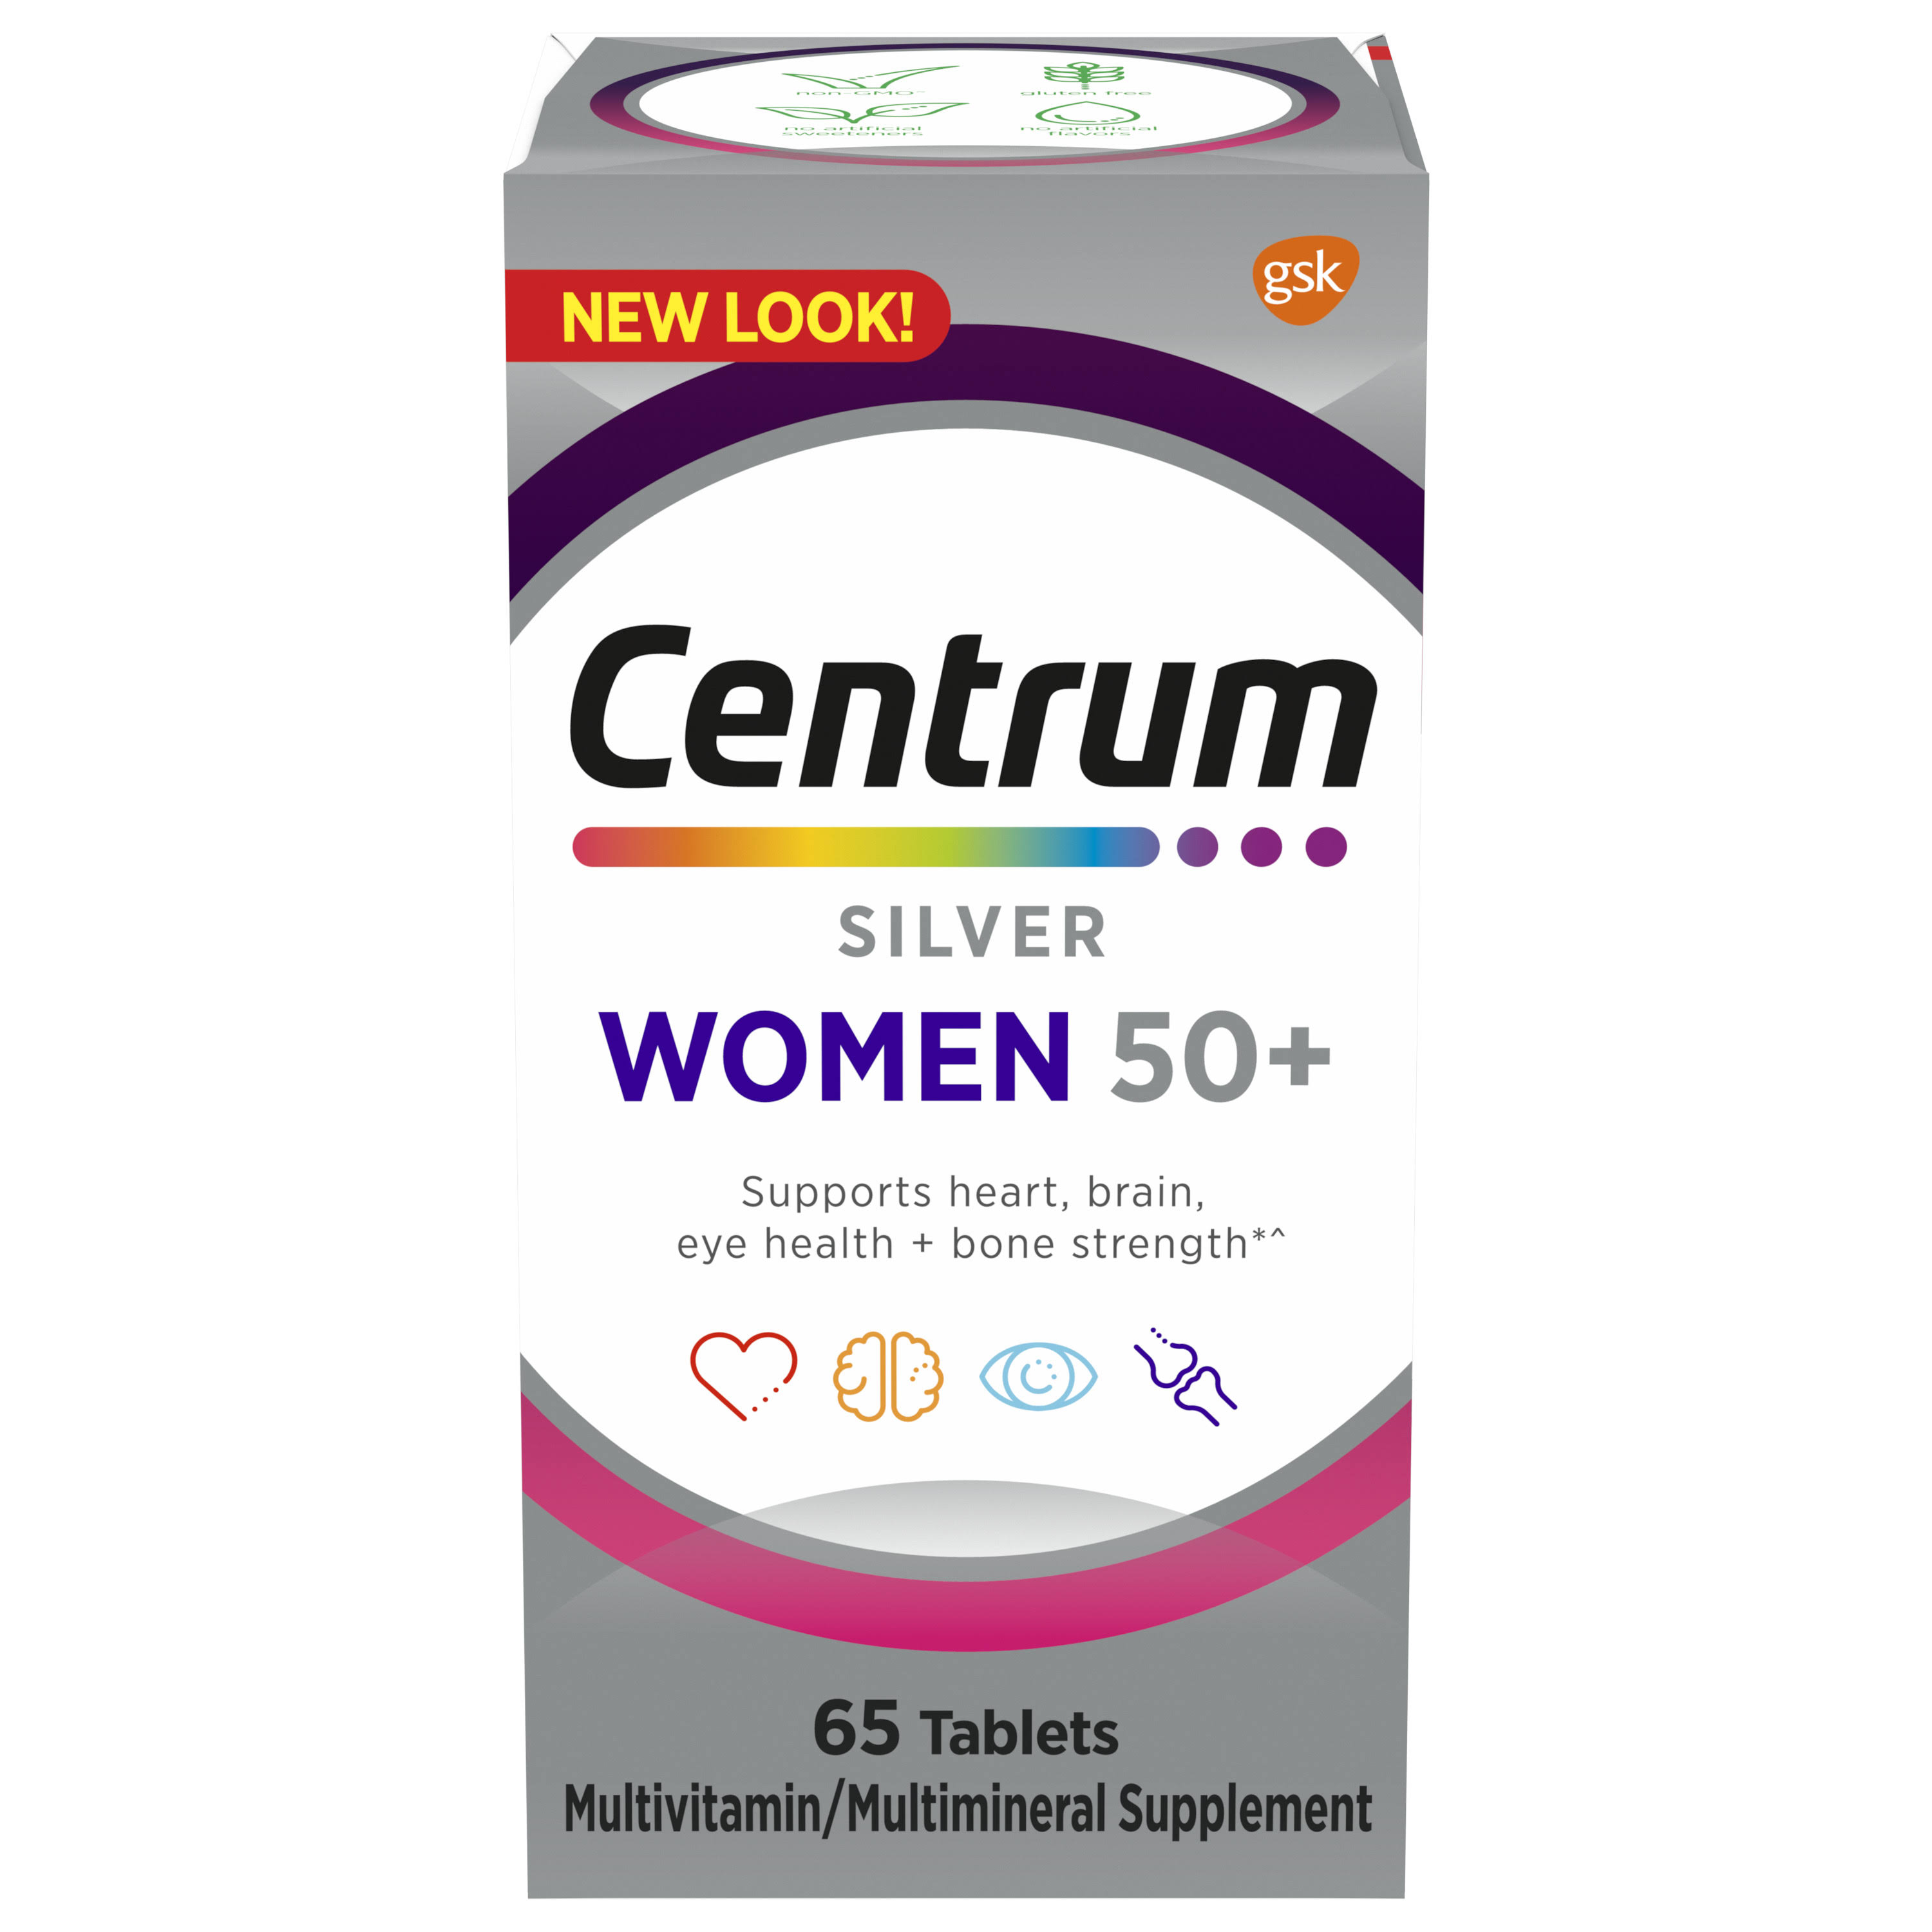 Centrum silver multivitamins for women over 50, multivitamin/multimineral supplement with vitamin d3, b vitamins, calcium and antioxidants - 65 count